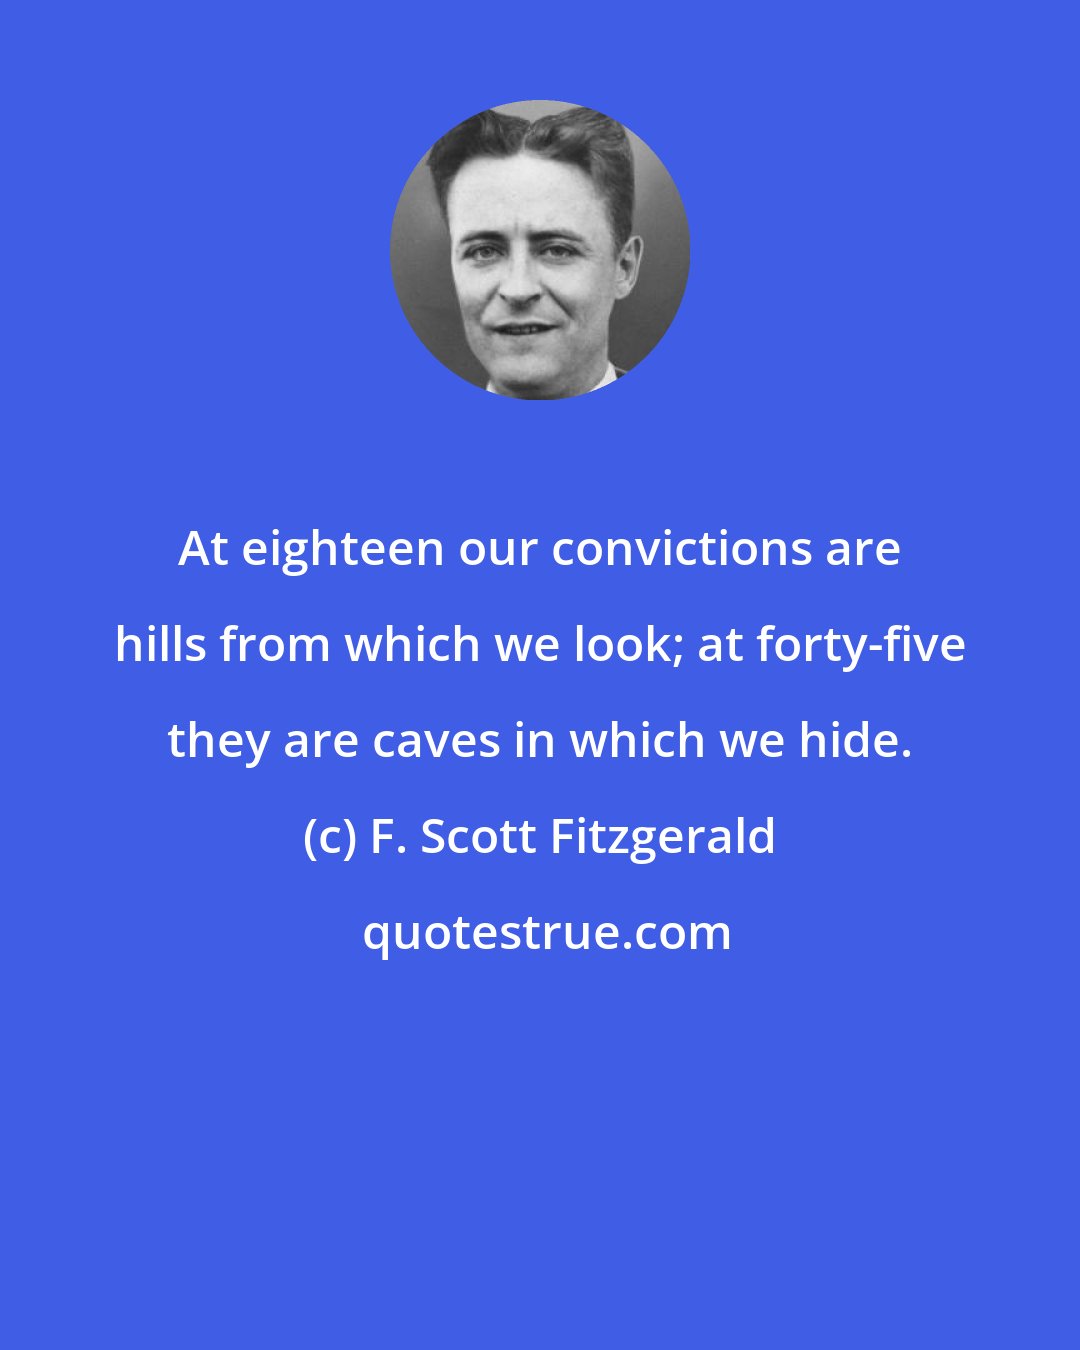 F. Scott Fitzgerald: At eighteen our convictions are hills from which we look; at forty-five they are caves in which we hide.